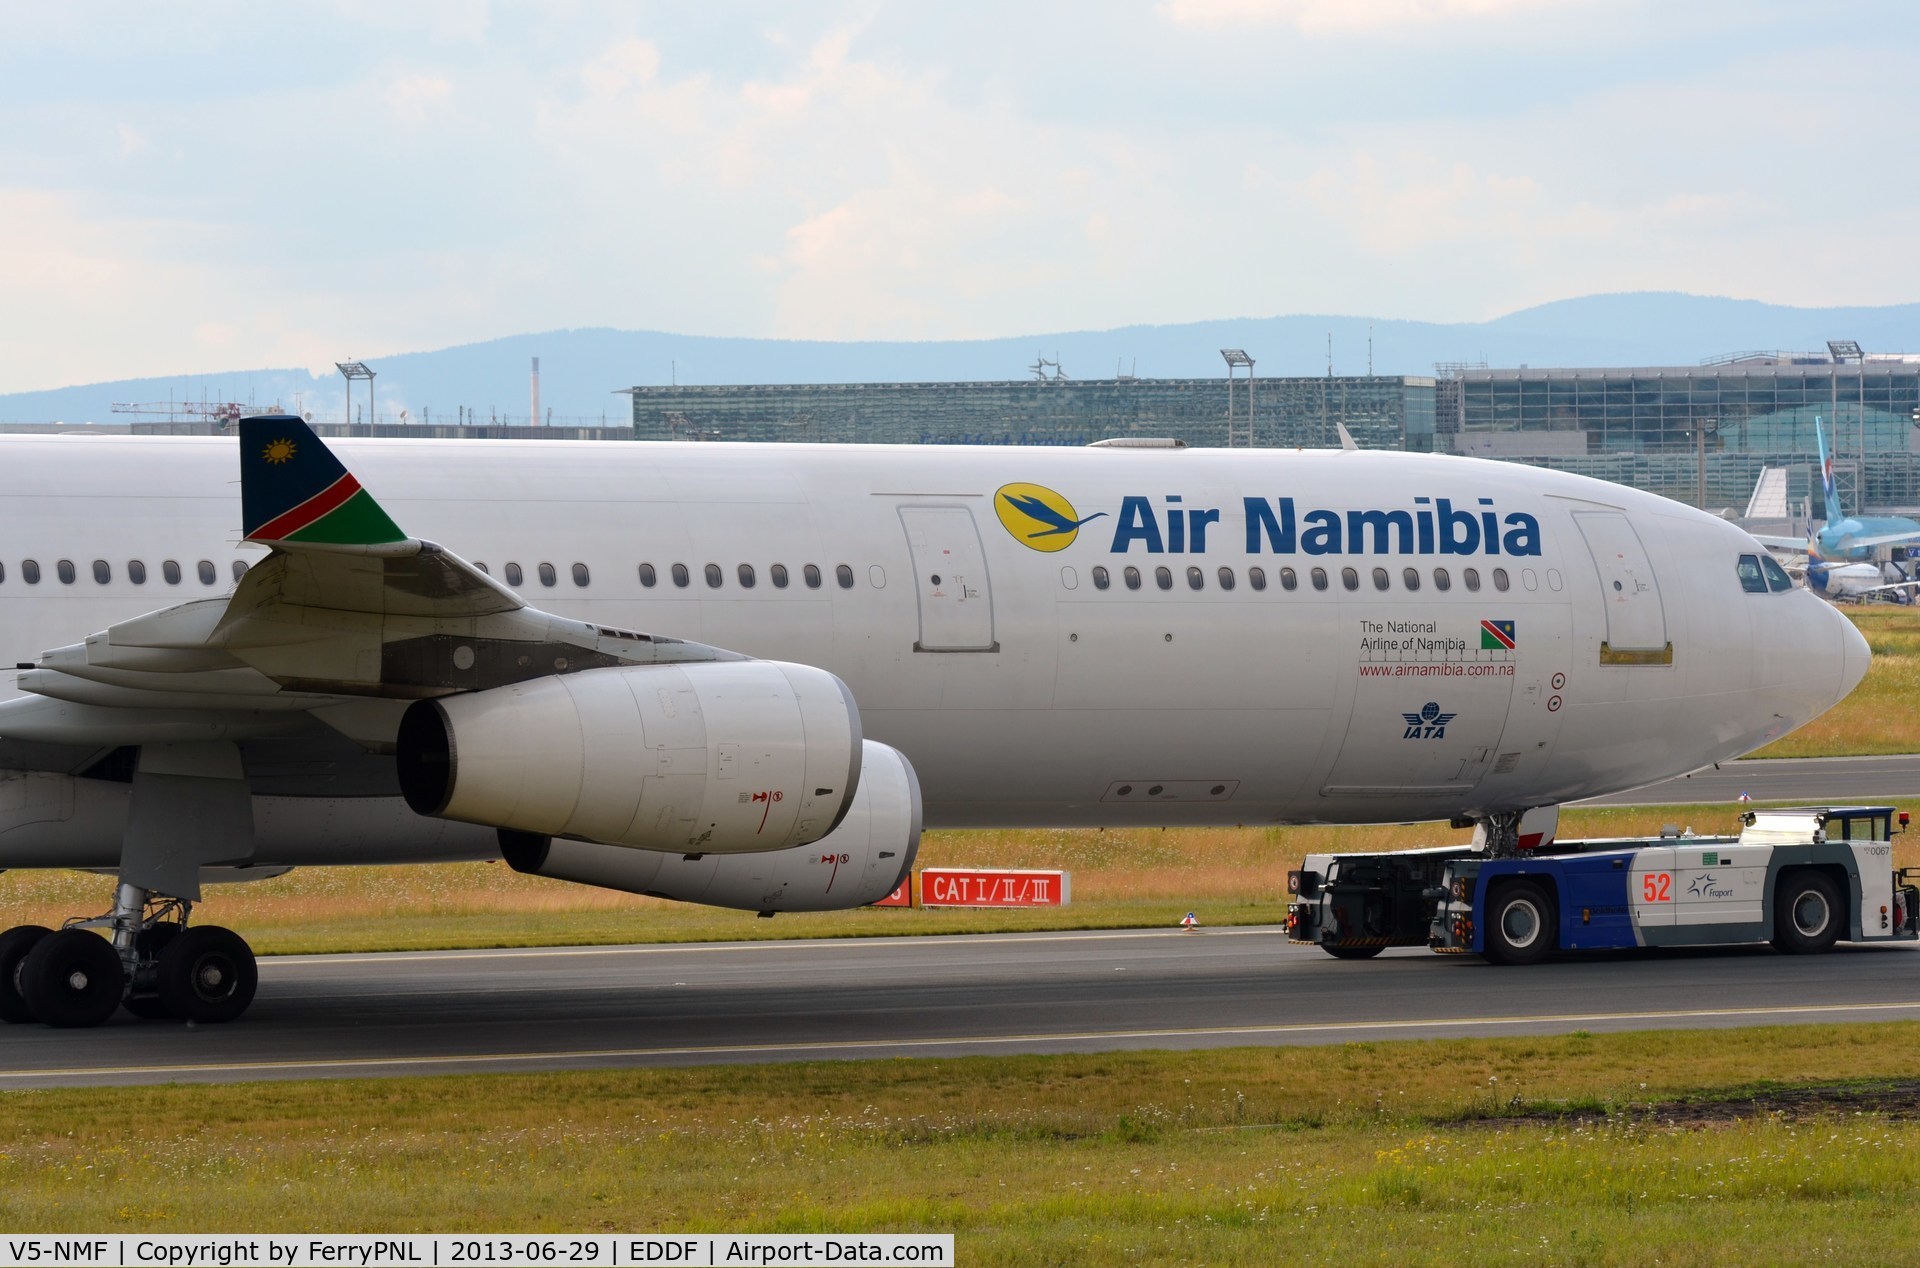 V5-NMF, 1994 Airbus A340-311 C/N 047, Namibia A343 front section